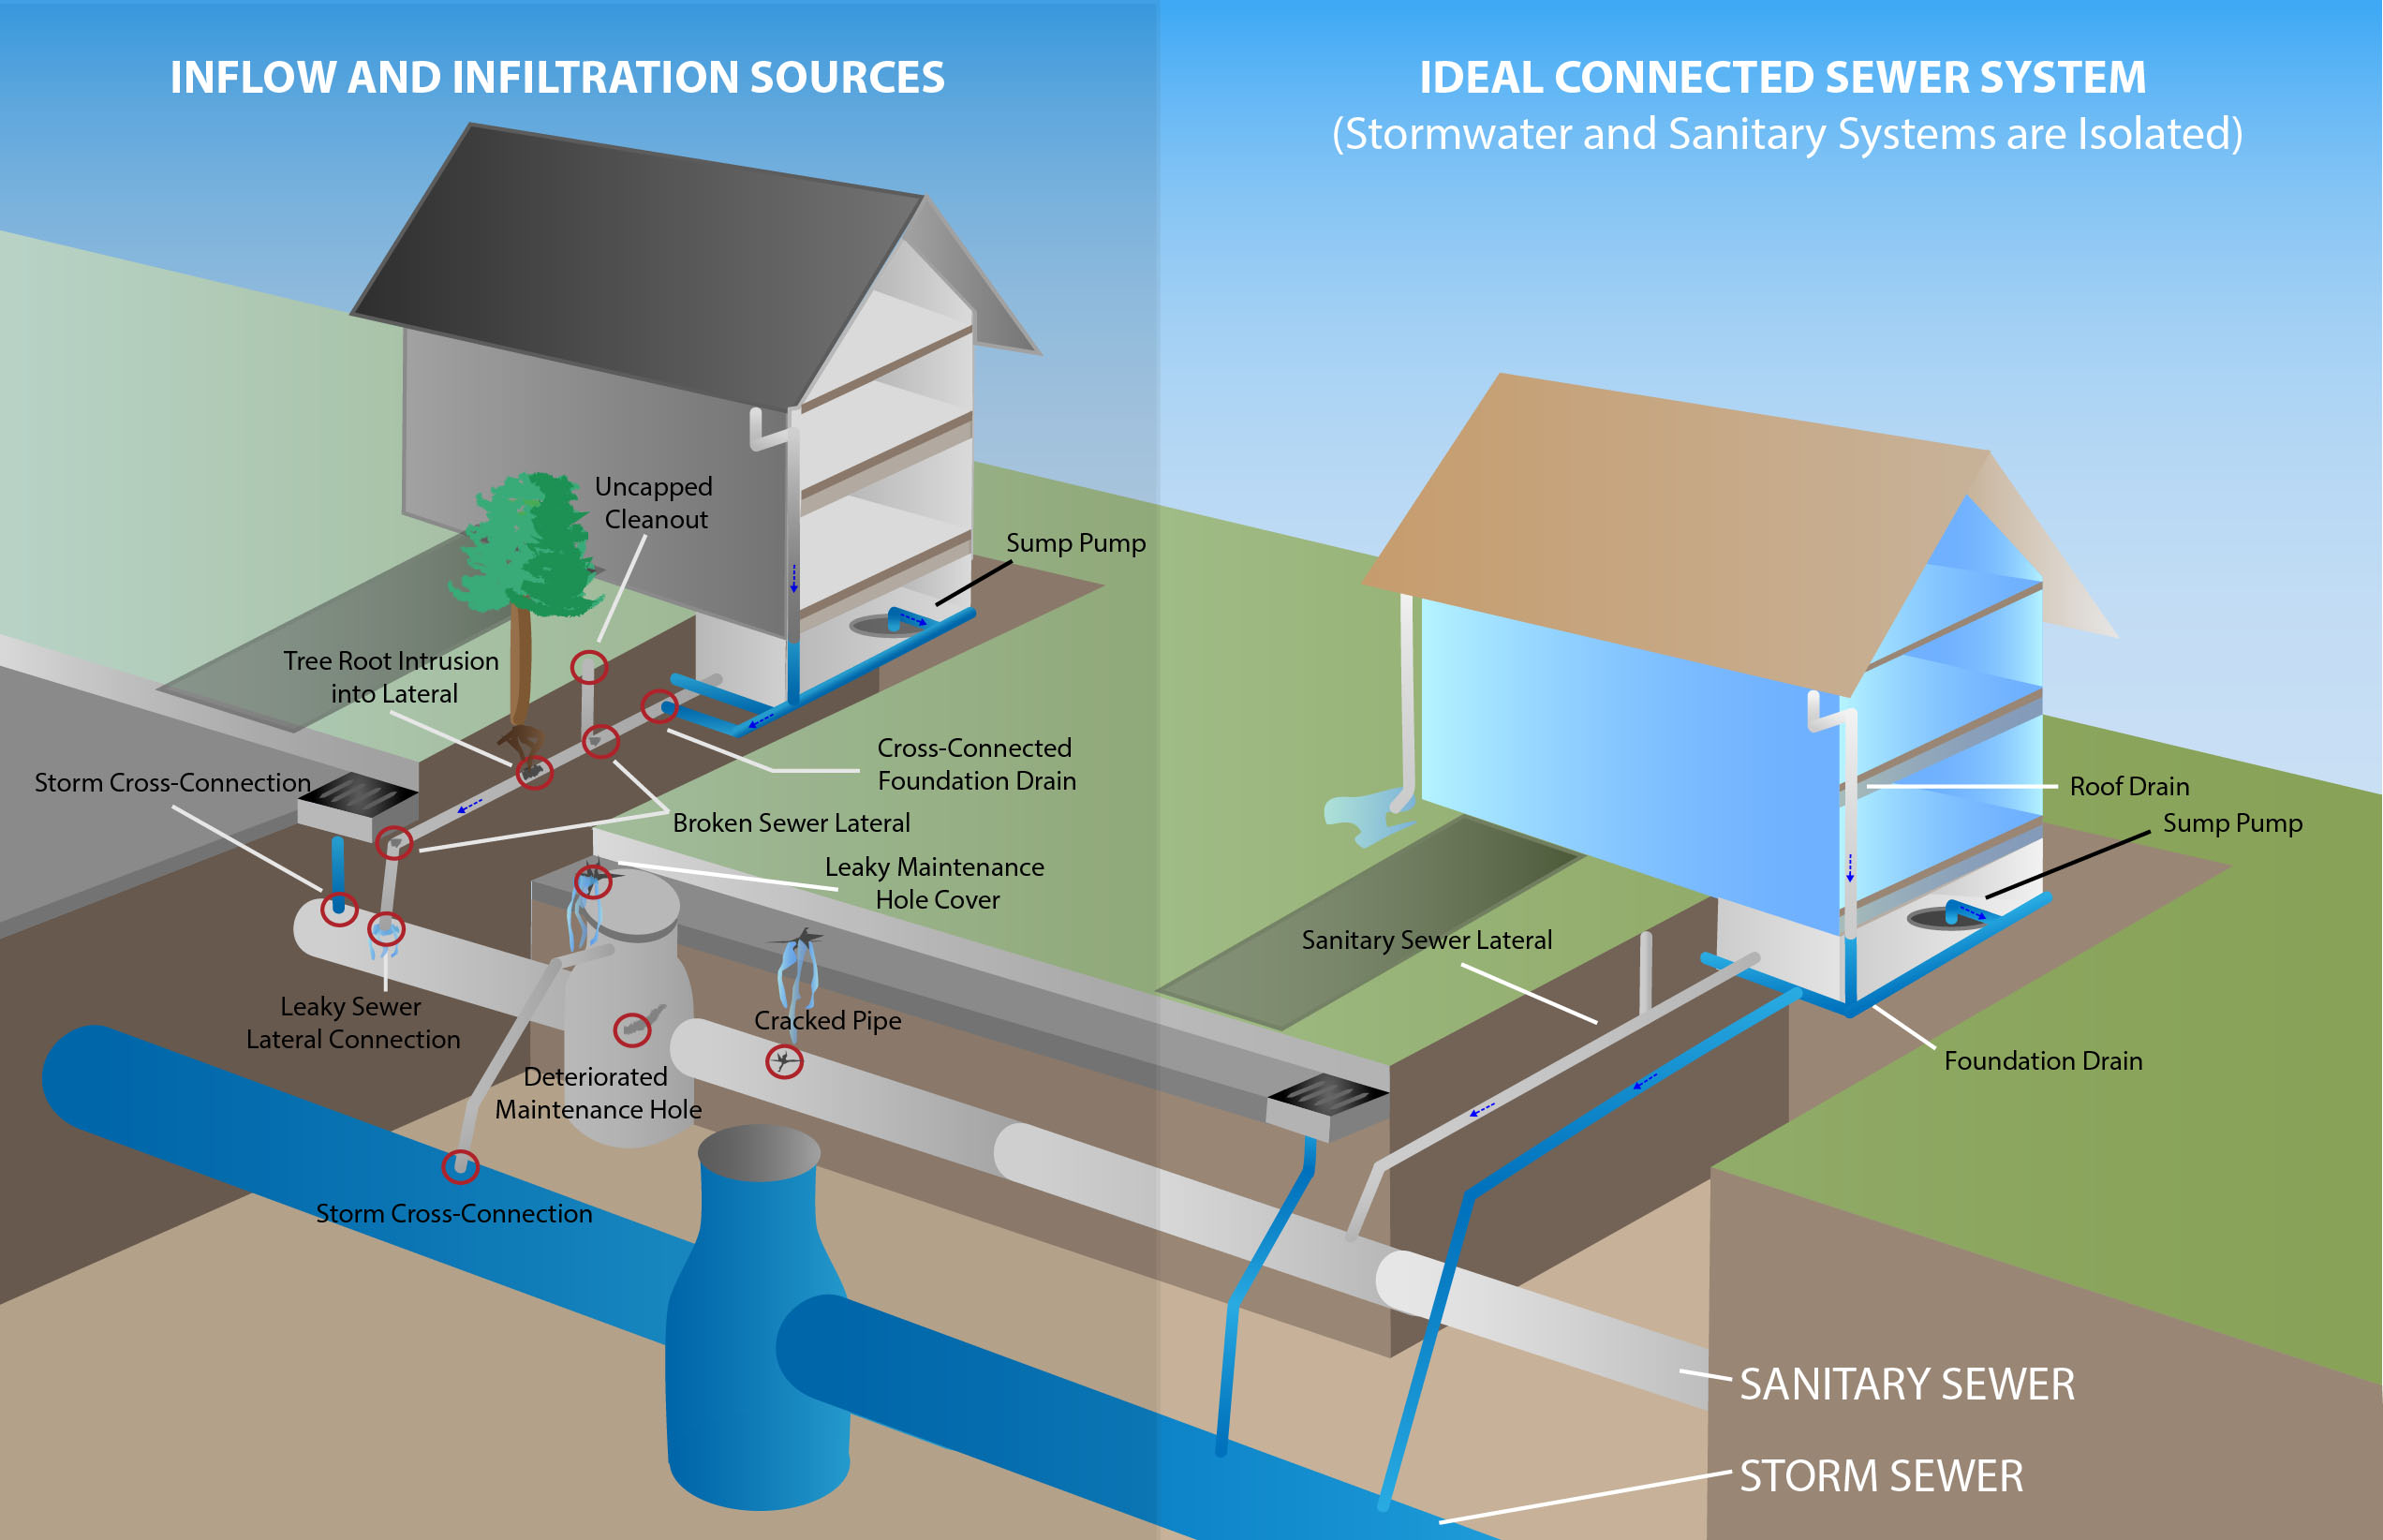 Image describes two processes: 1. Inflow and infiltration sources. This starts at an uncapped cleanout, to the tree root intrusion, then storm cross section, to leaky sewers and cracked pipes. This then infiltrates. Second, the diagram shows the ideal connected sewer system, where stormwater and sanitary systems are isolated. There is a roof drain, sump pump, and foundation drain all into sewer systems that are not cracked. 